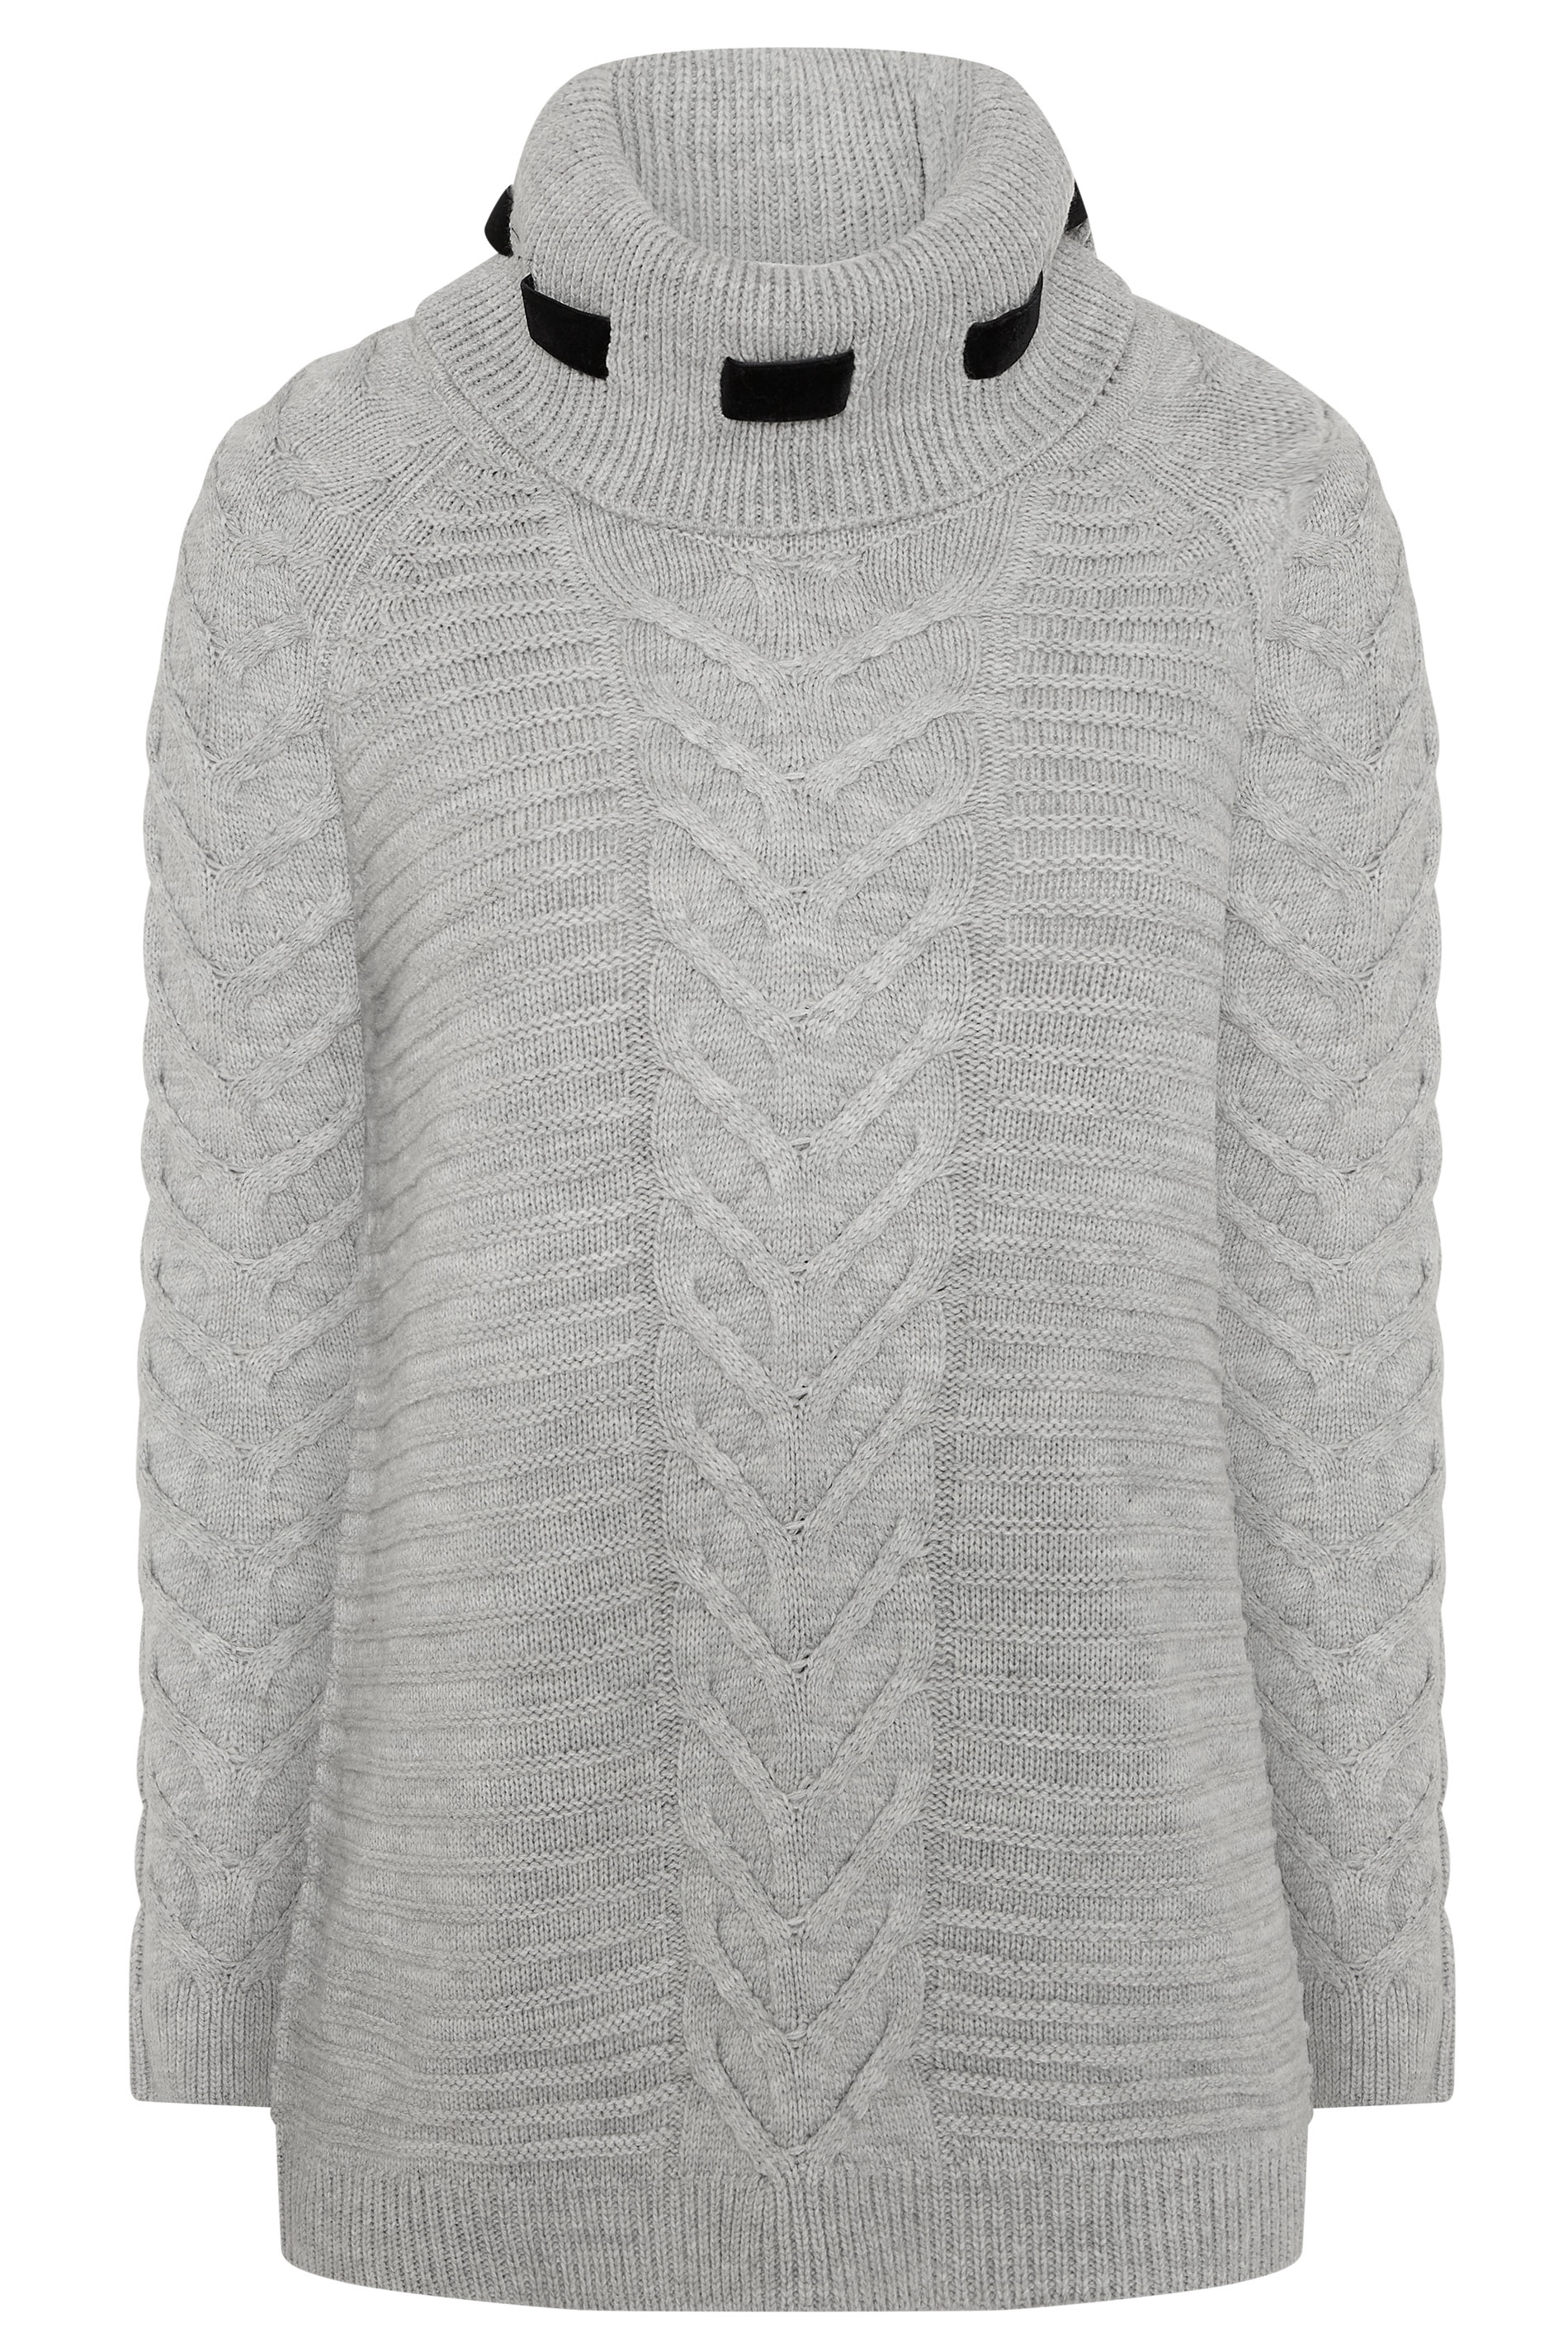 KARL LAGERFELD PARIS Grey Cable Knit Turtle Neck Jumper | Long Tall Sally